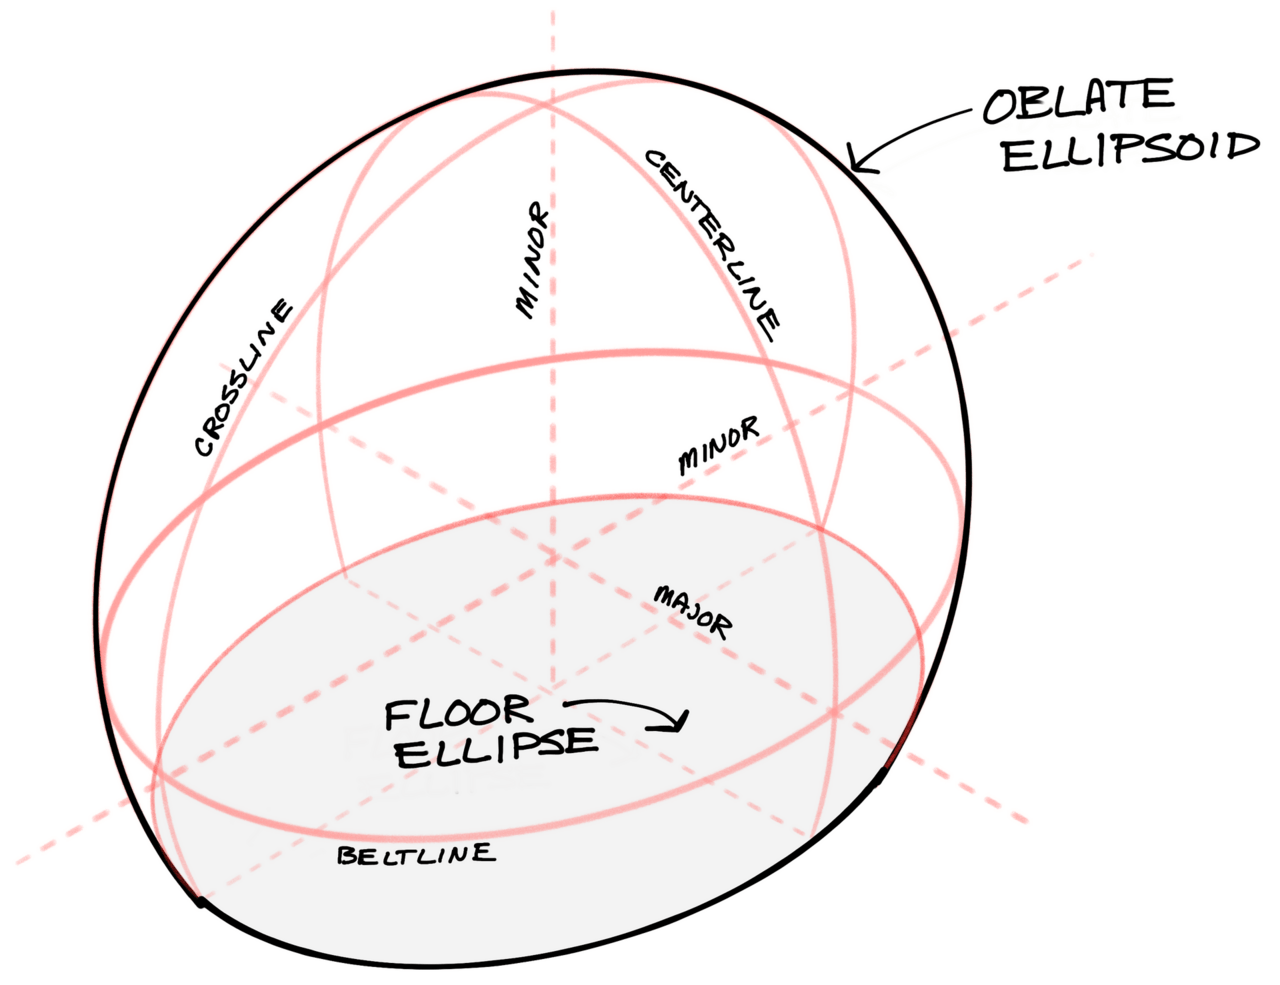 A sketch of a horizontal oblate ellipsoid.